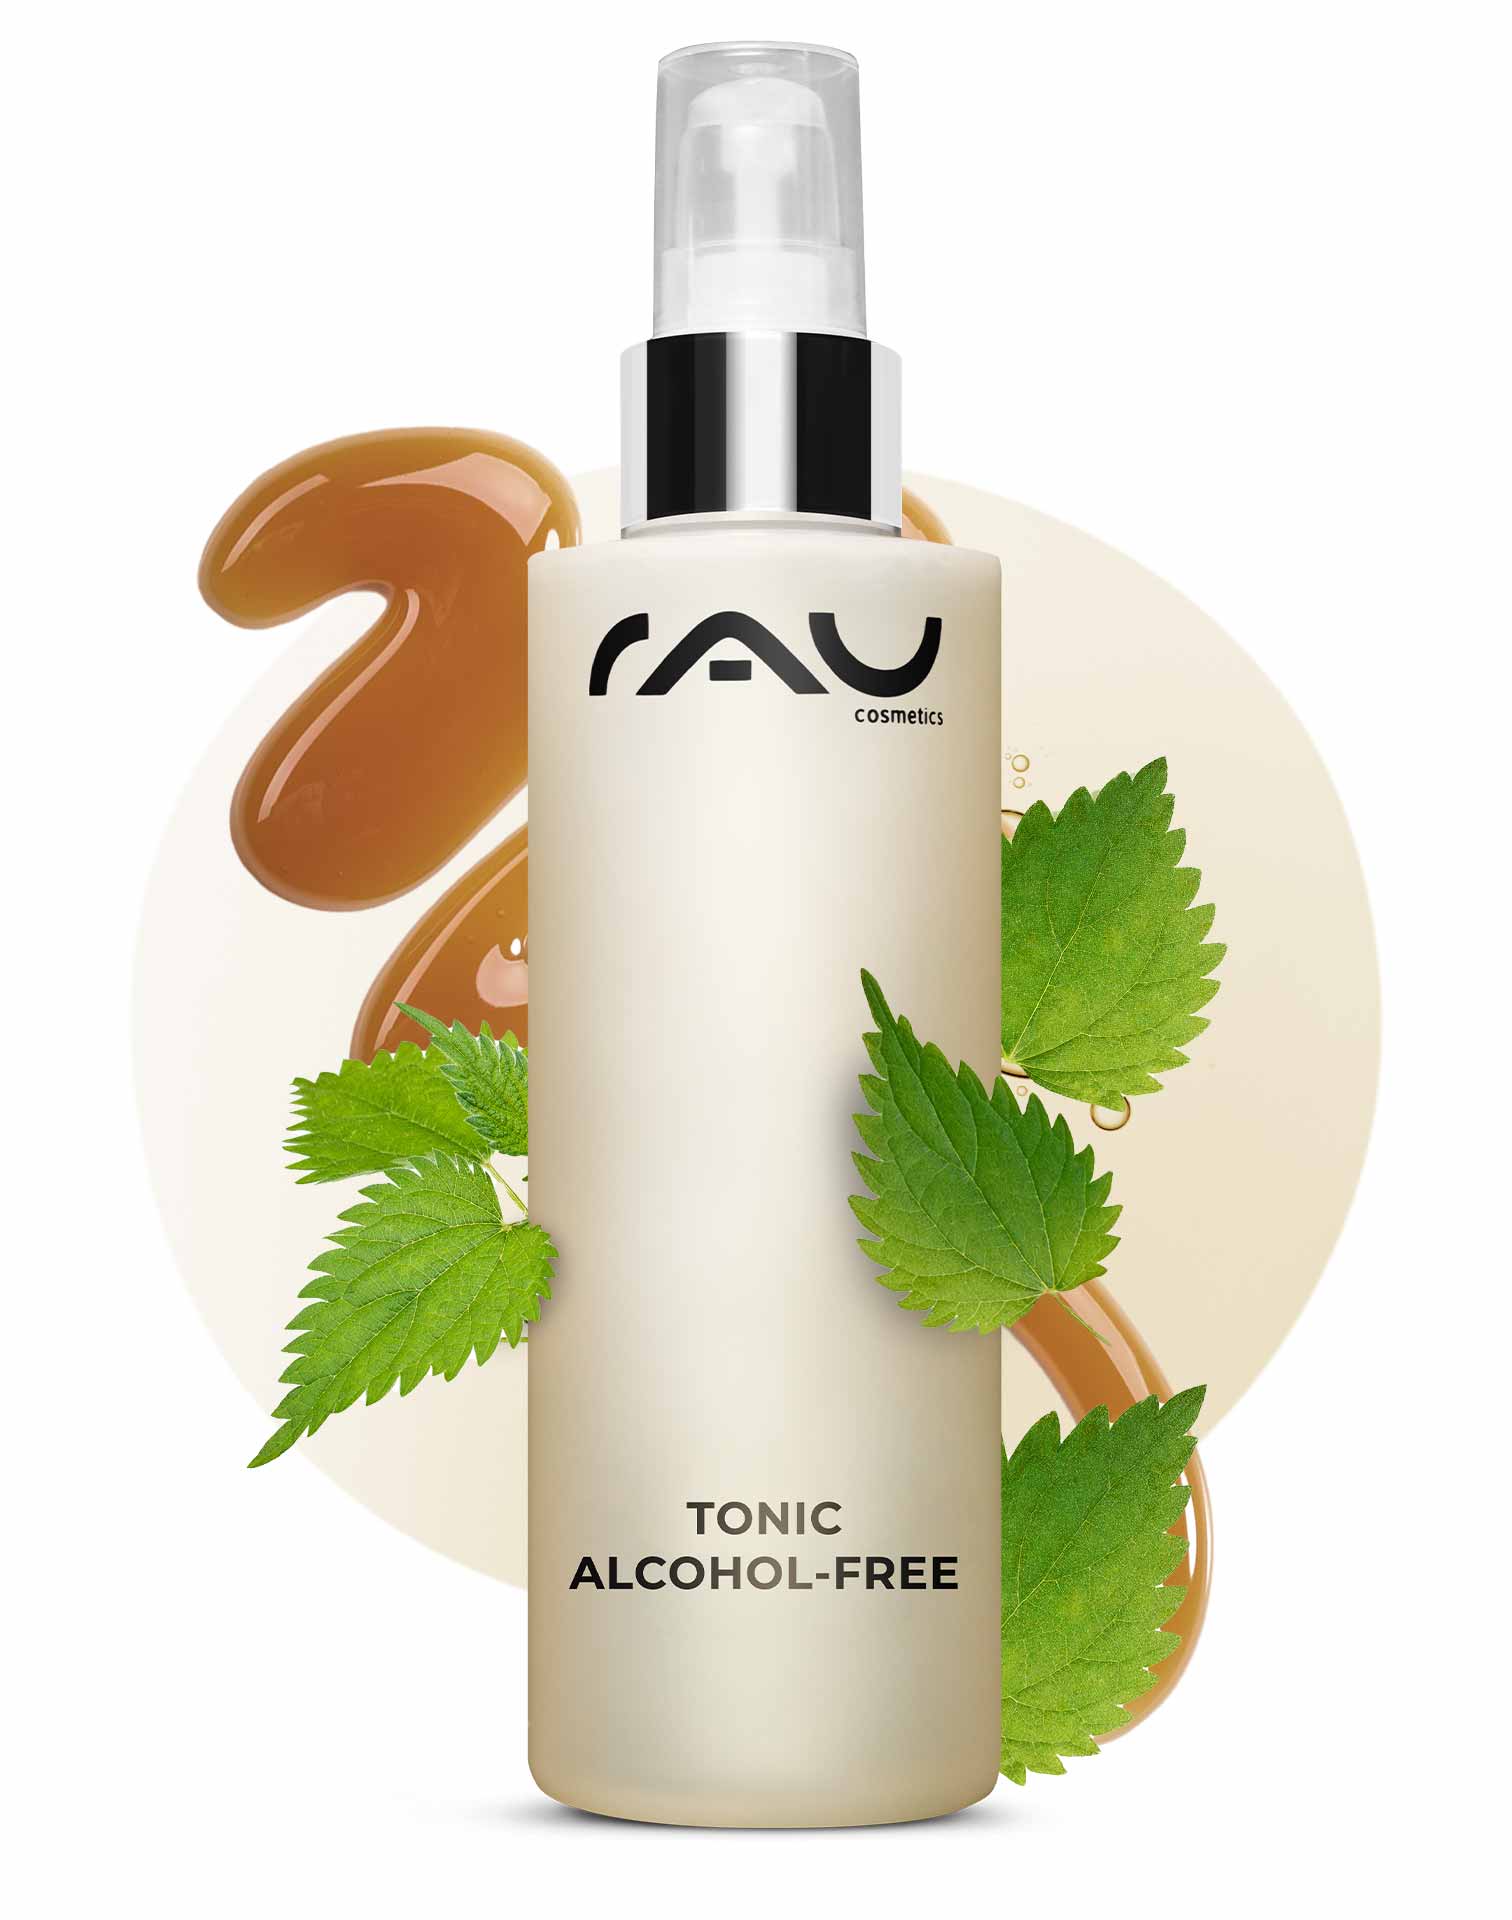 Tonic alcohol-free 200 ml with nettle extract